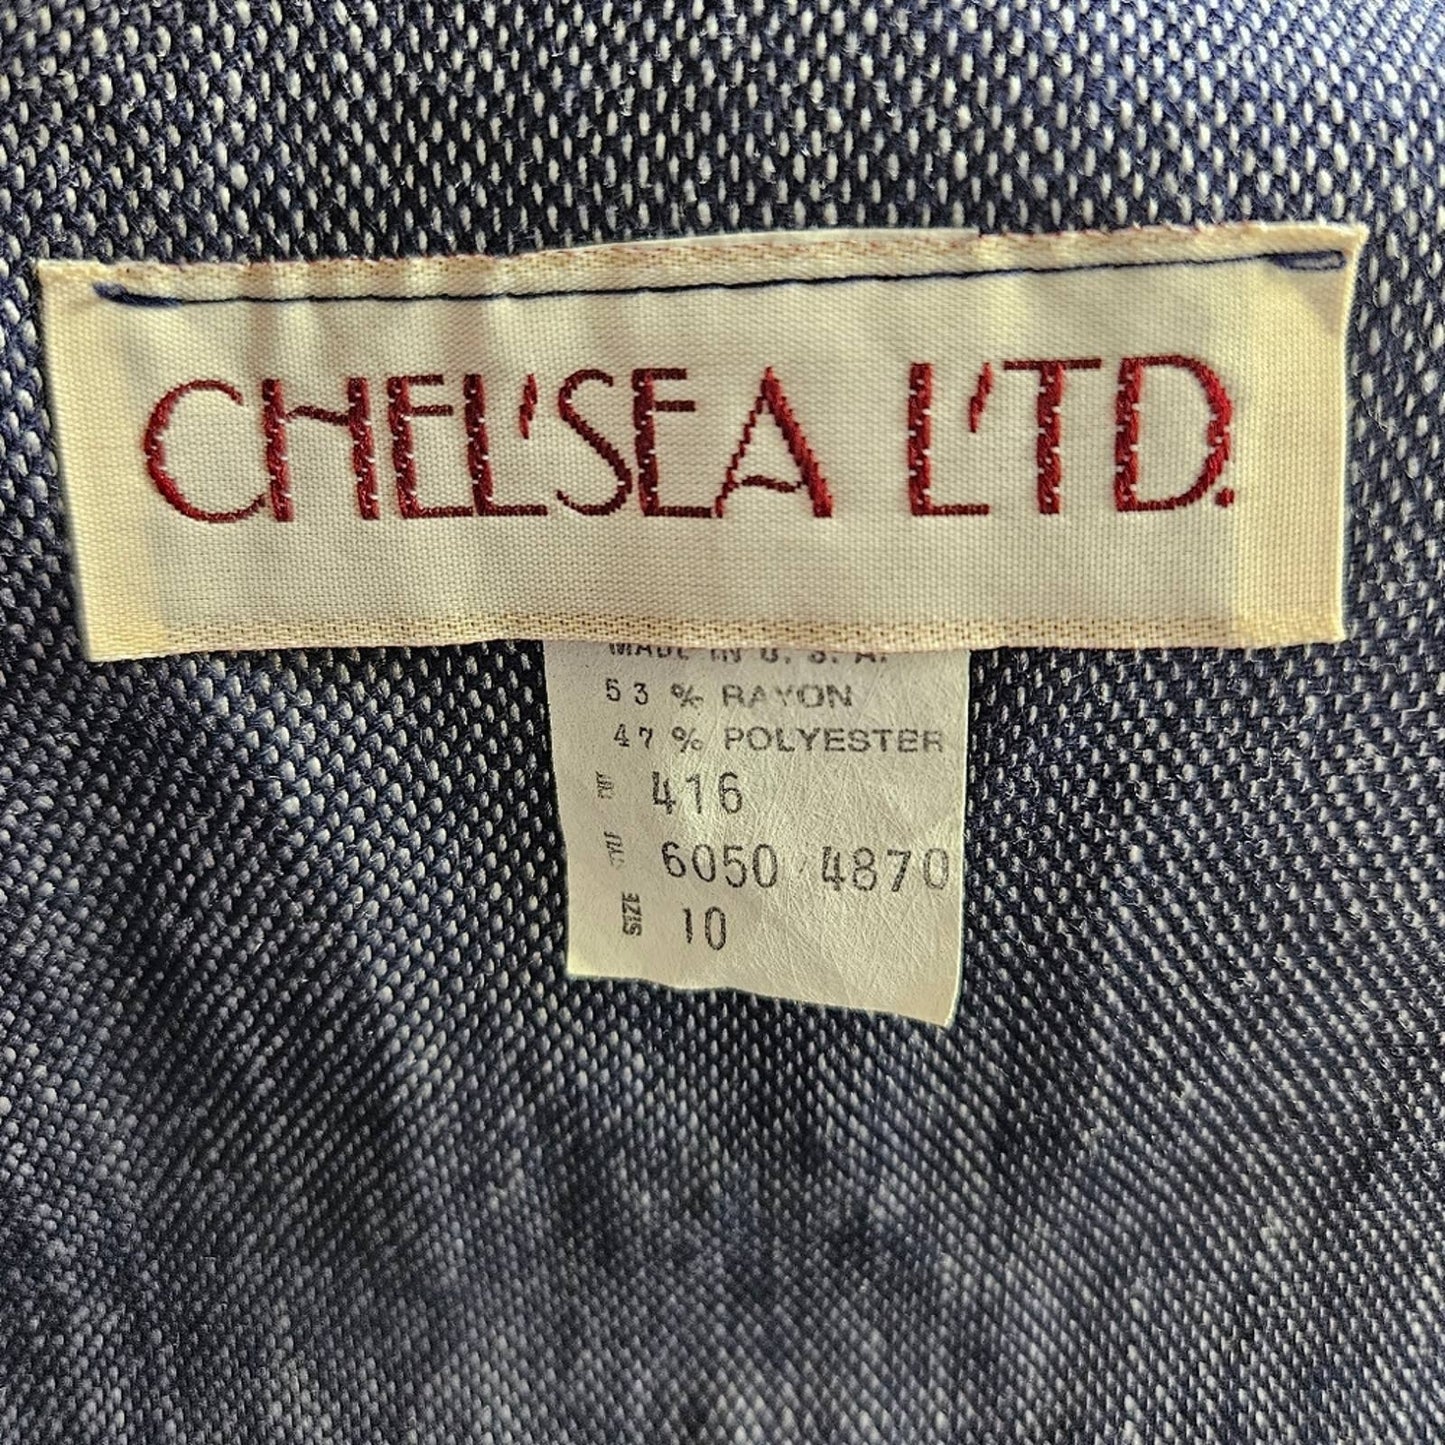 Vintage Chelsea Ltd Blue Chambray Long Sleeve Button Front Dress 10 Made in USA